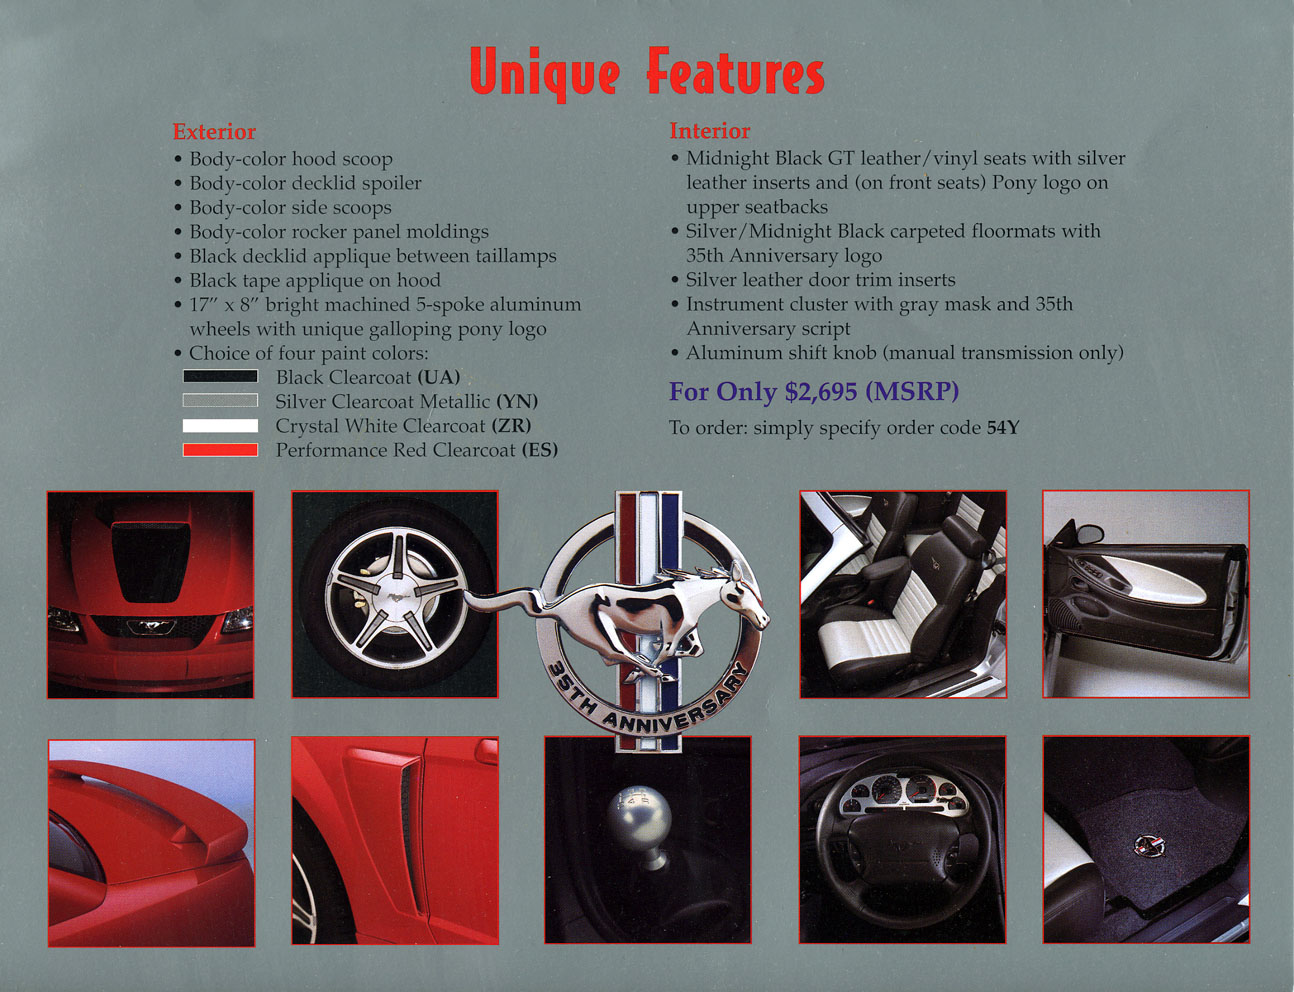 1999_Ford_Mustang_Limited_Edition-05